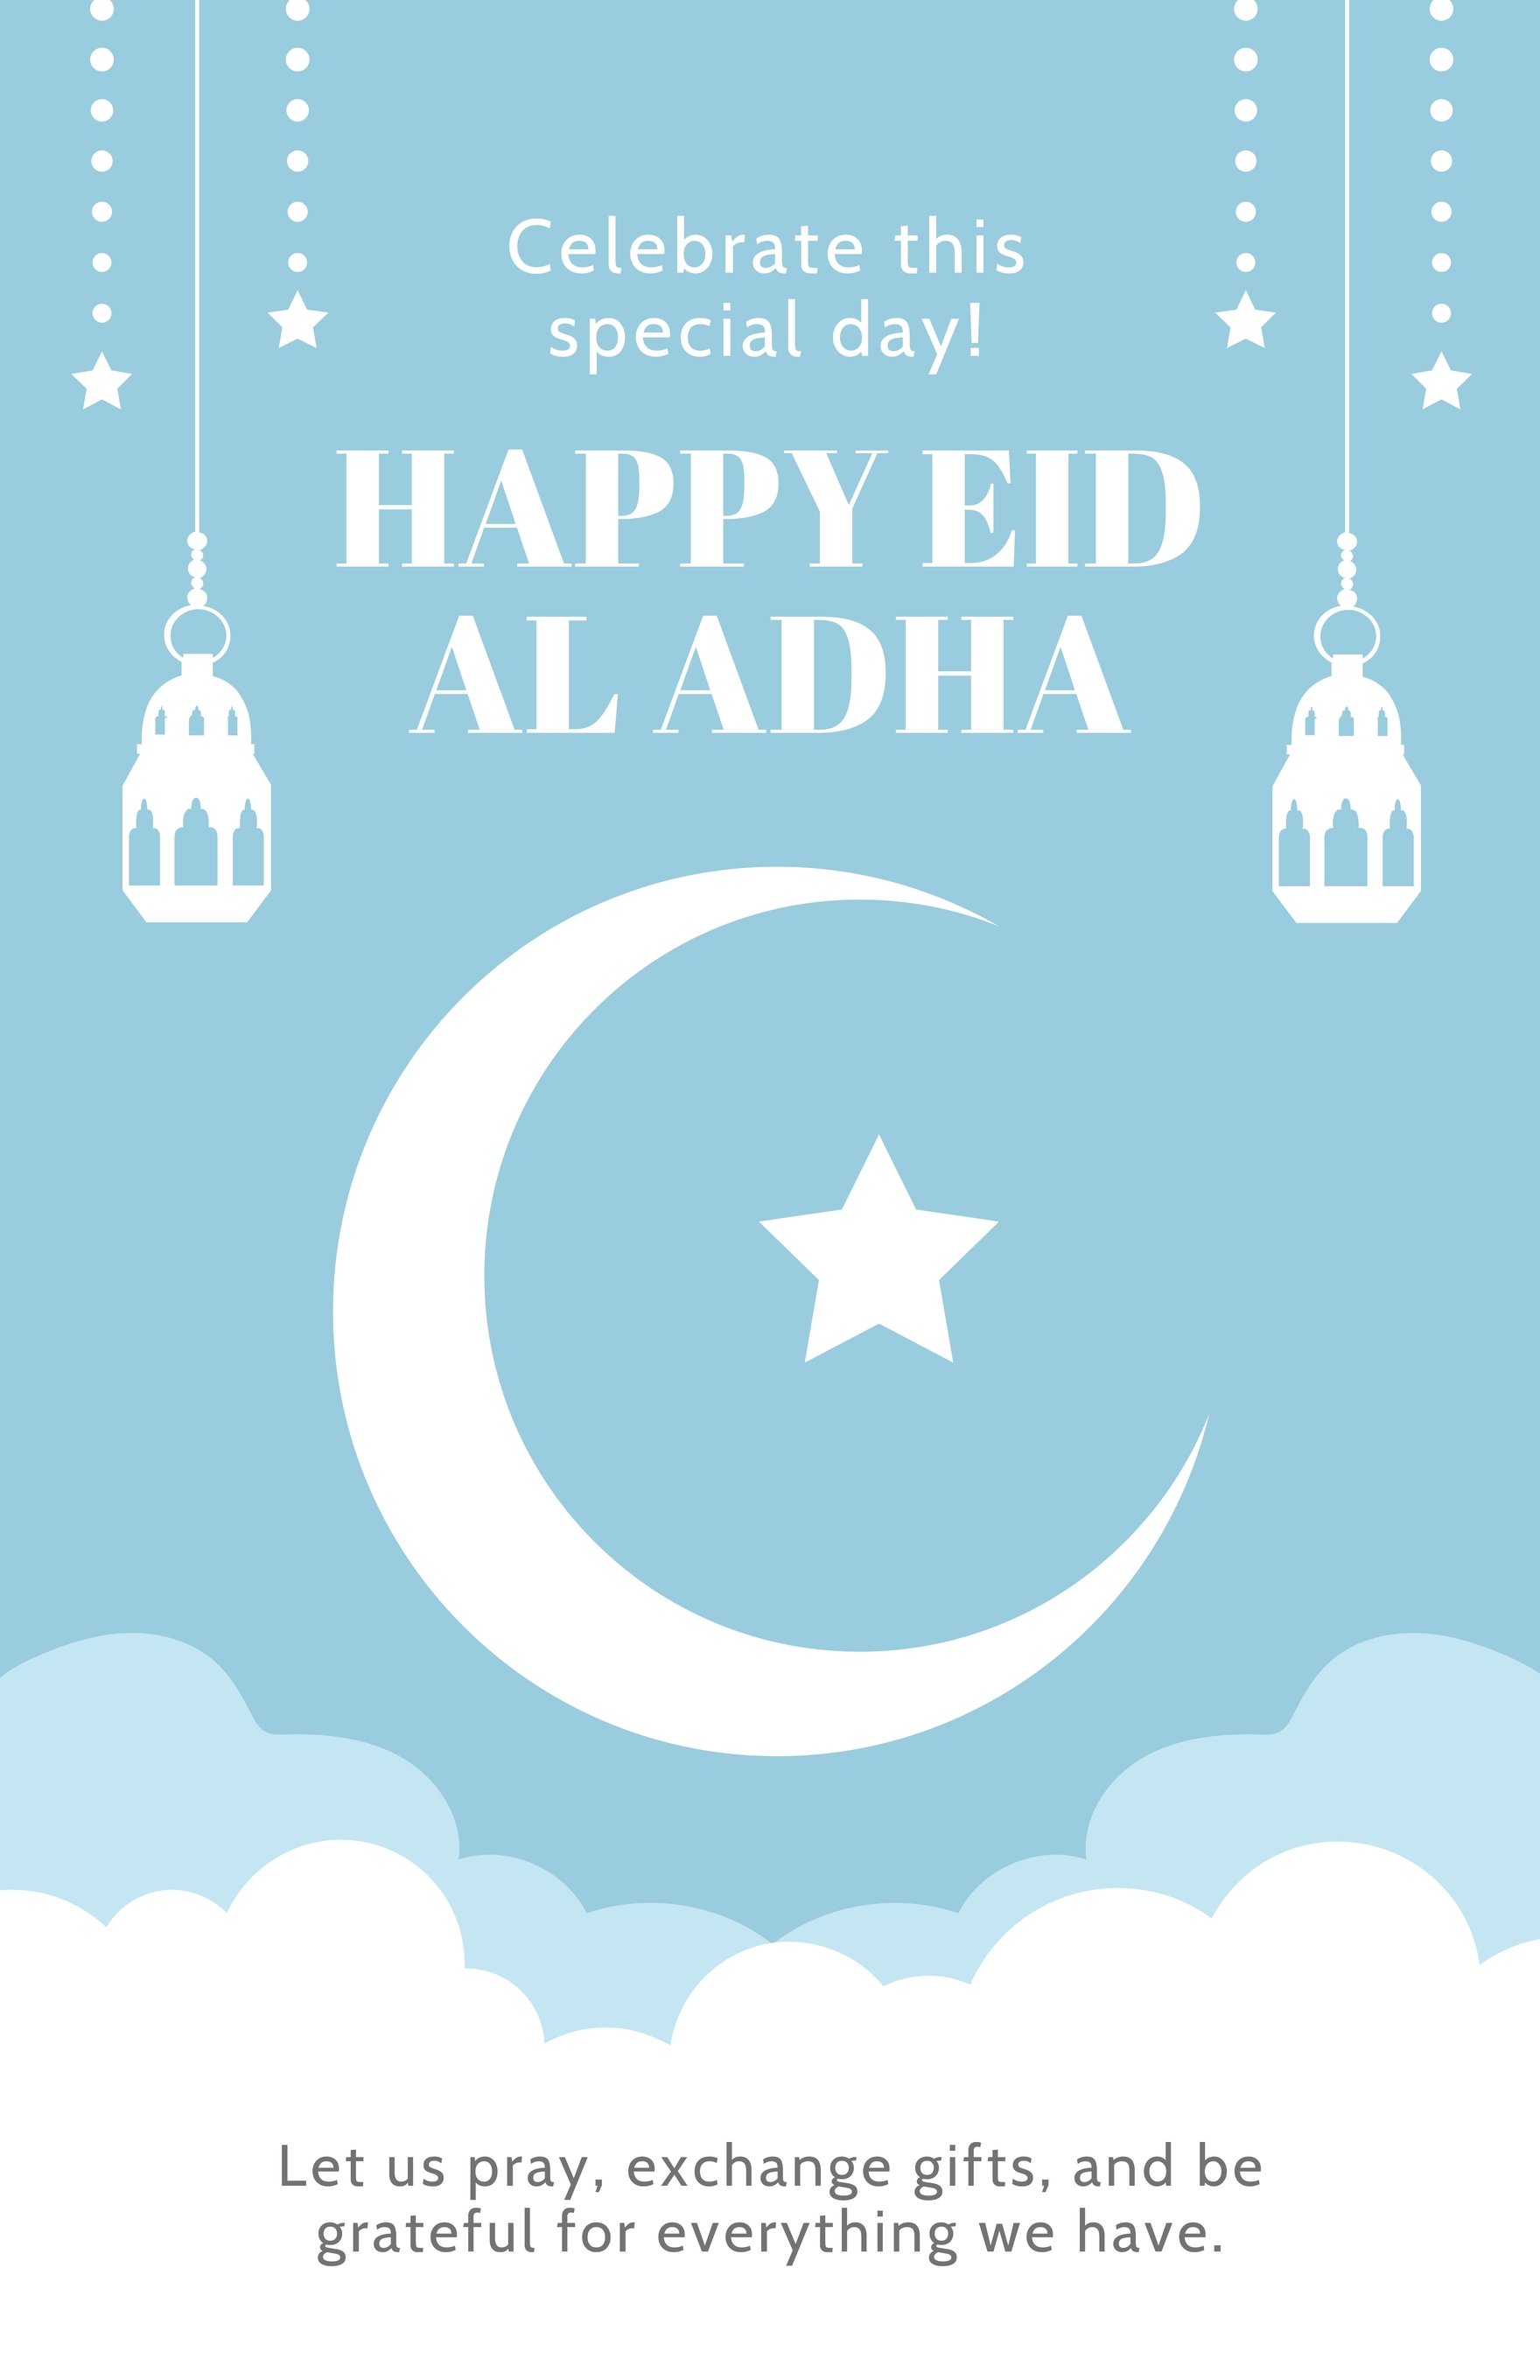 Free Modern Eid Al Adha Poster in Word, Google Docs, Illustrator, PSD, Apple Pages, Publisher